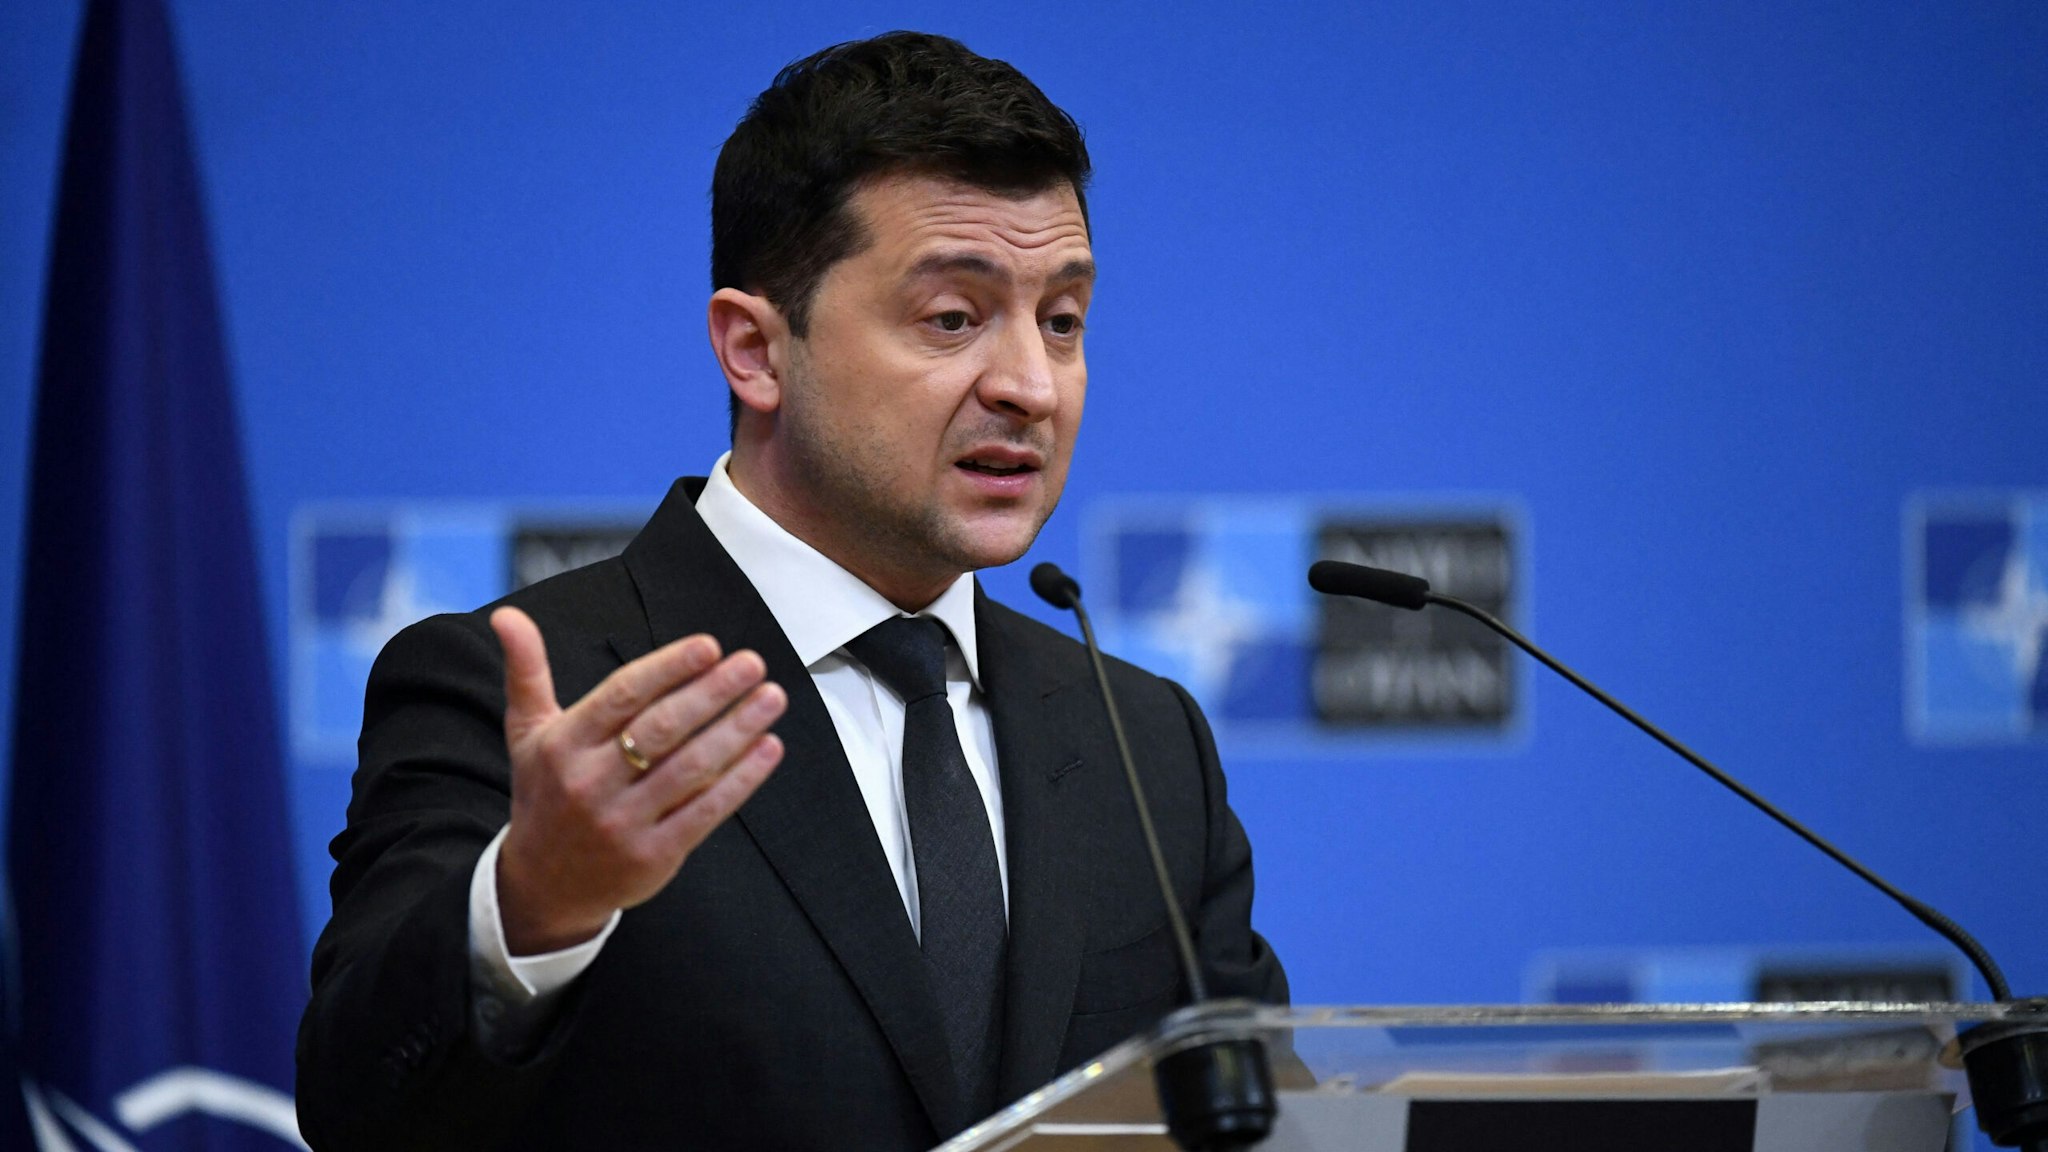 Ukrainian President Volodymyr Zelensky talks during a press conference with NATO Secretary General after their bilateral meeting at the European Union headquarters in Brussels on December 16, 2021.